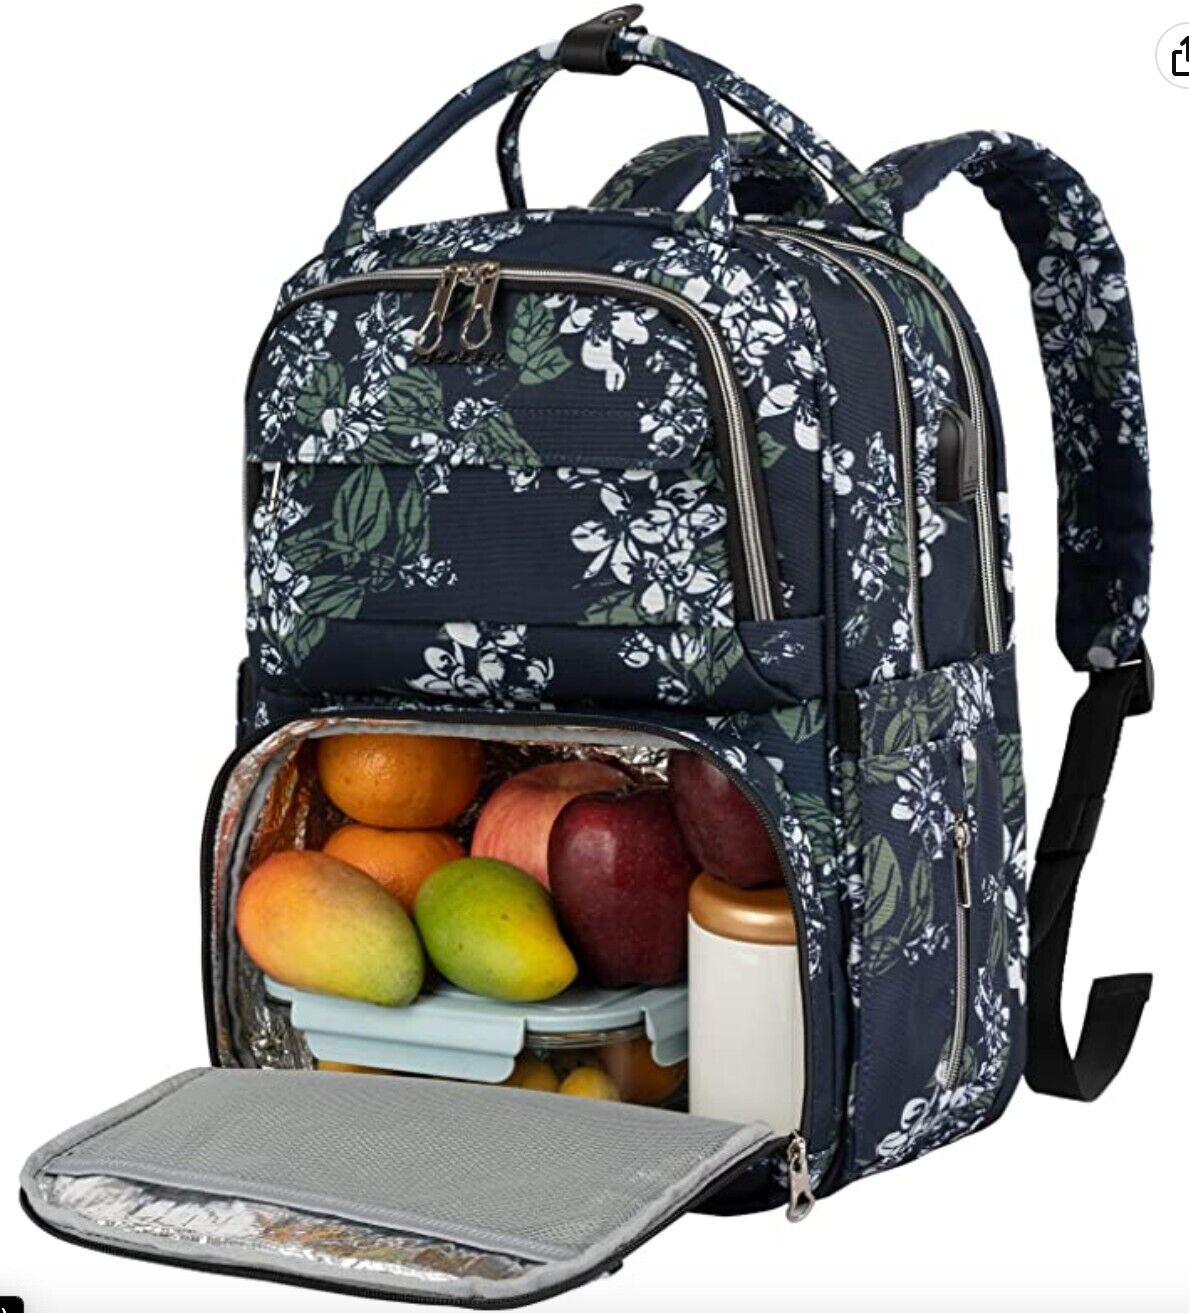 KROSER Lunch Backpack 15.6 in. Laptop Backpack with USB Port & Insulated Cooler